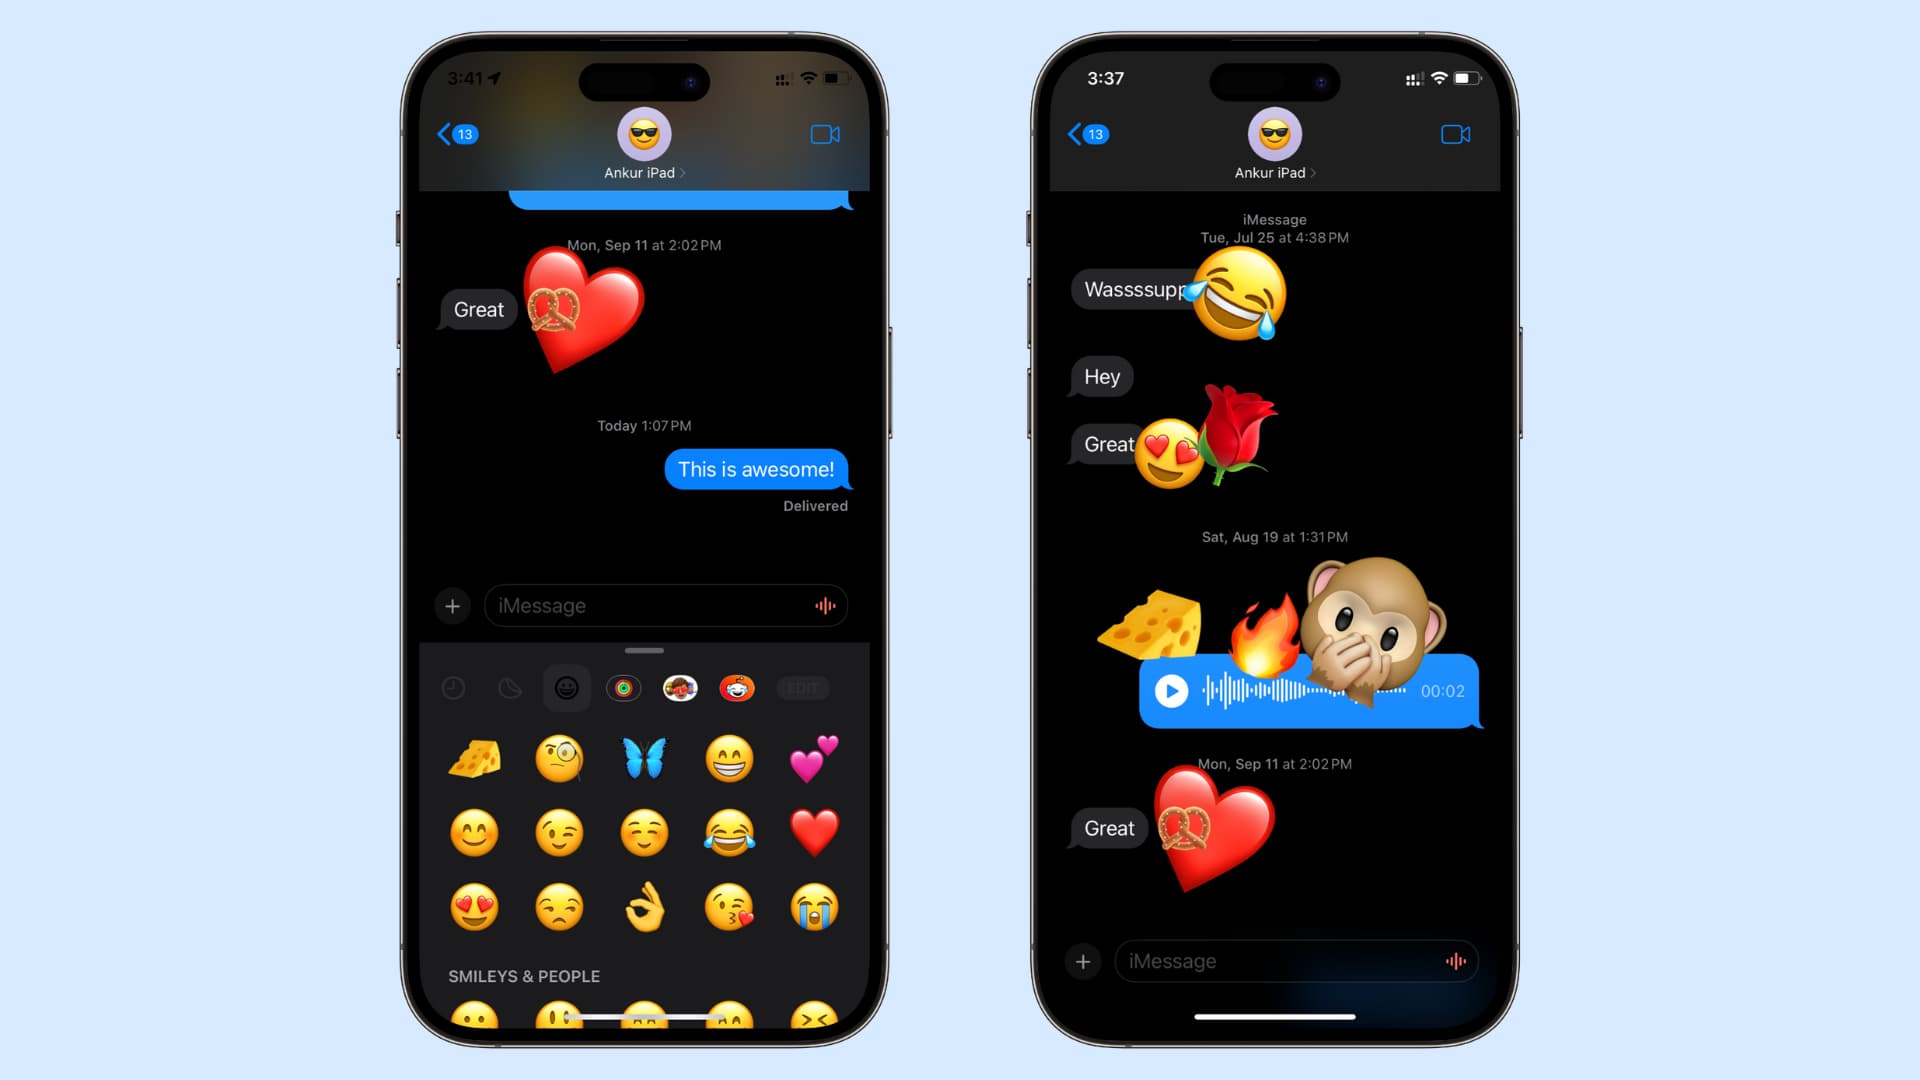 Emoji reactions in Messages app on iPhone